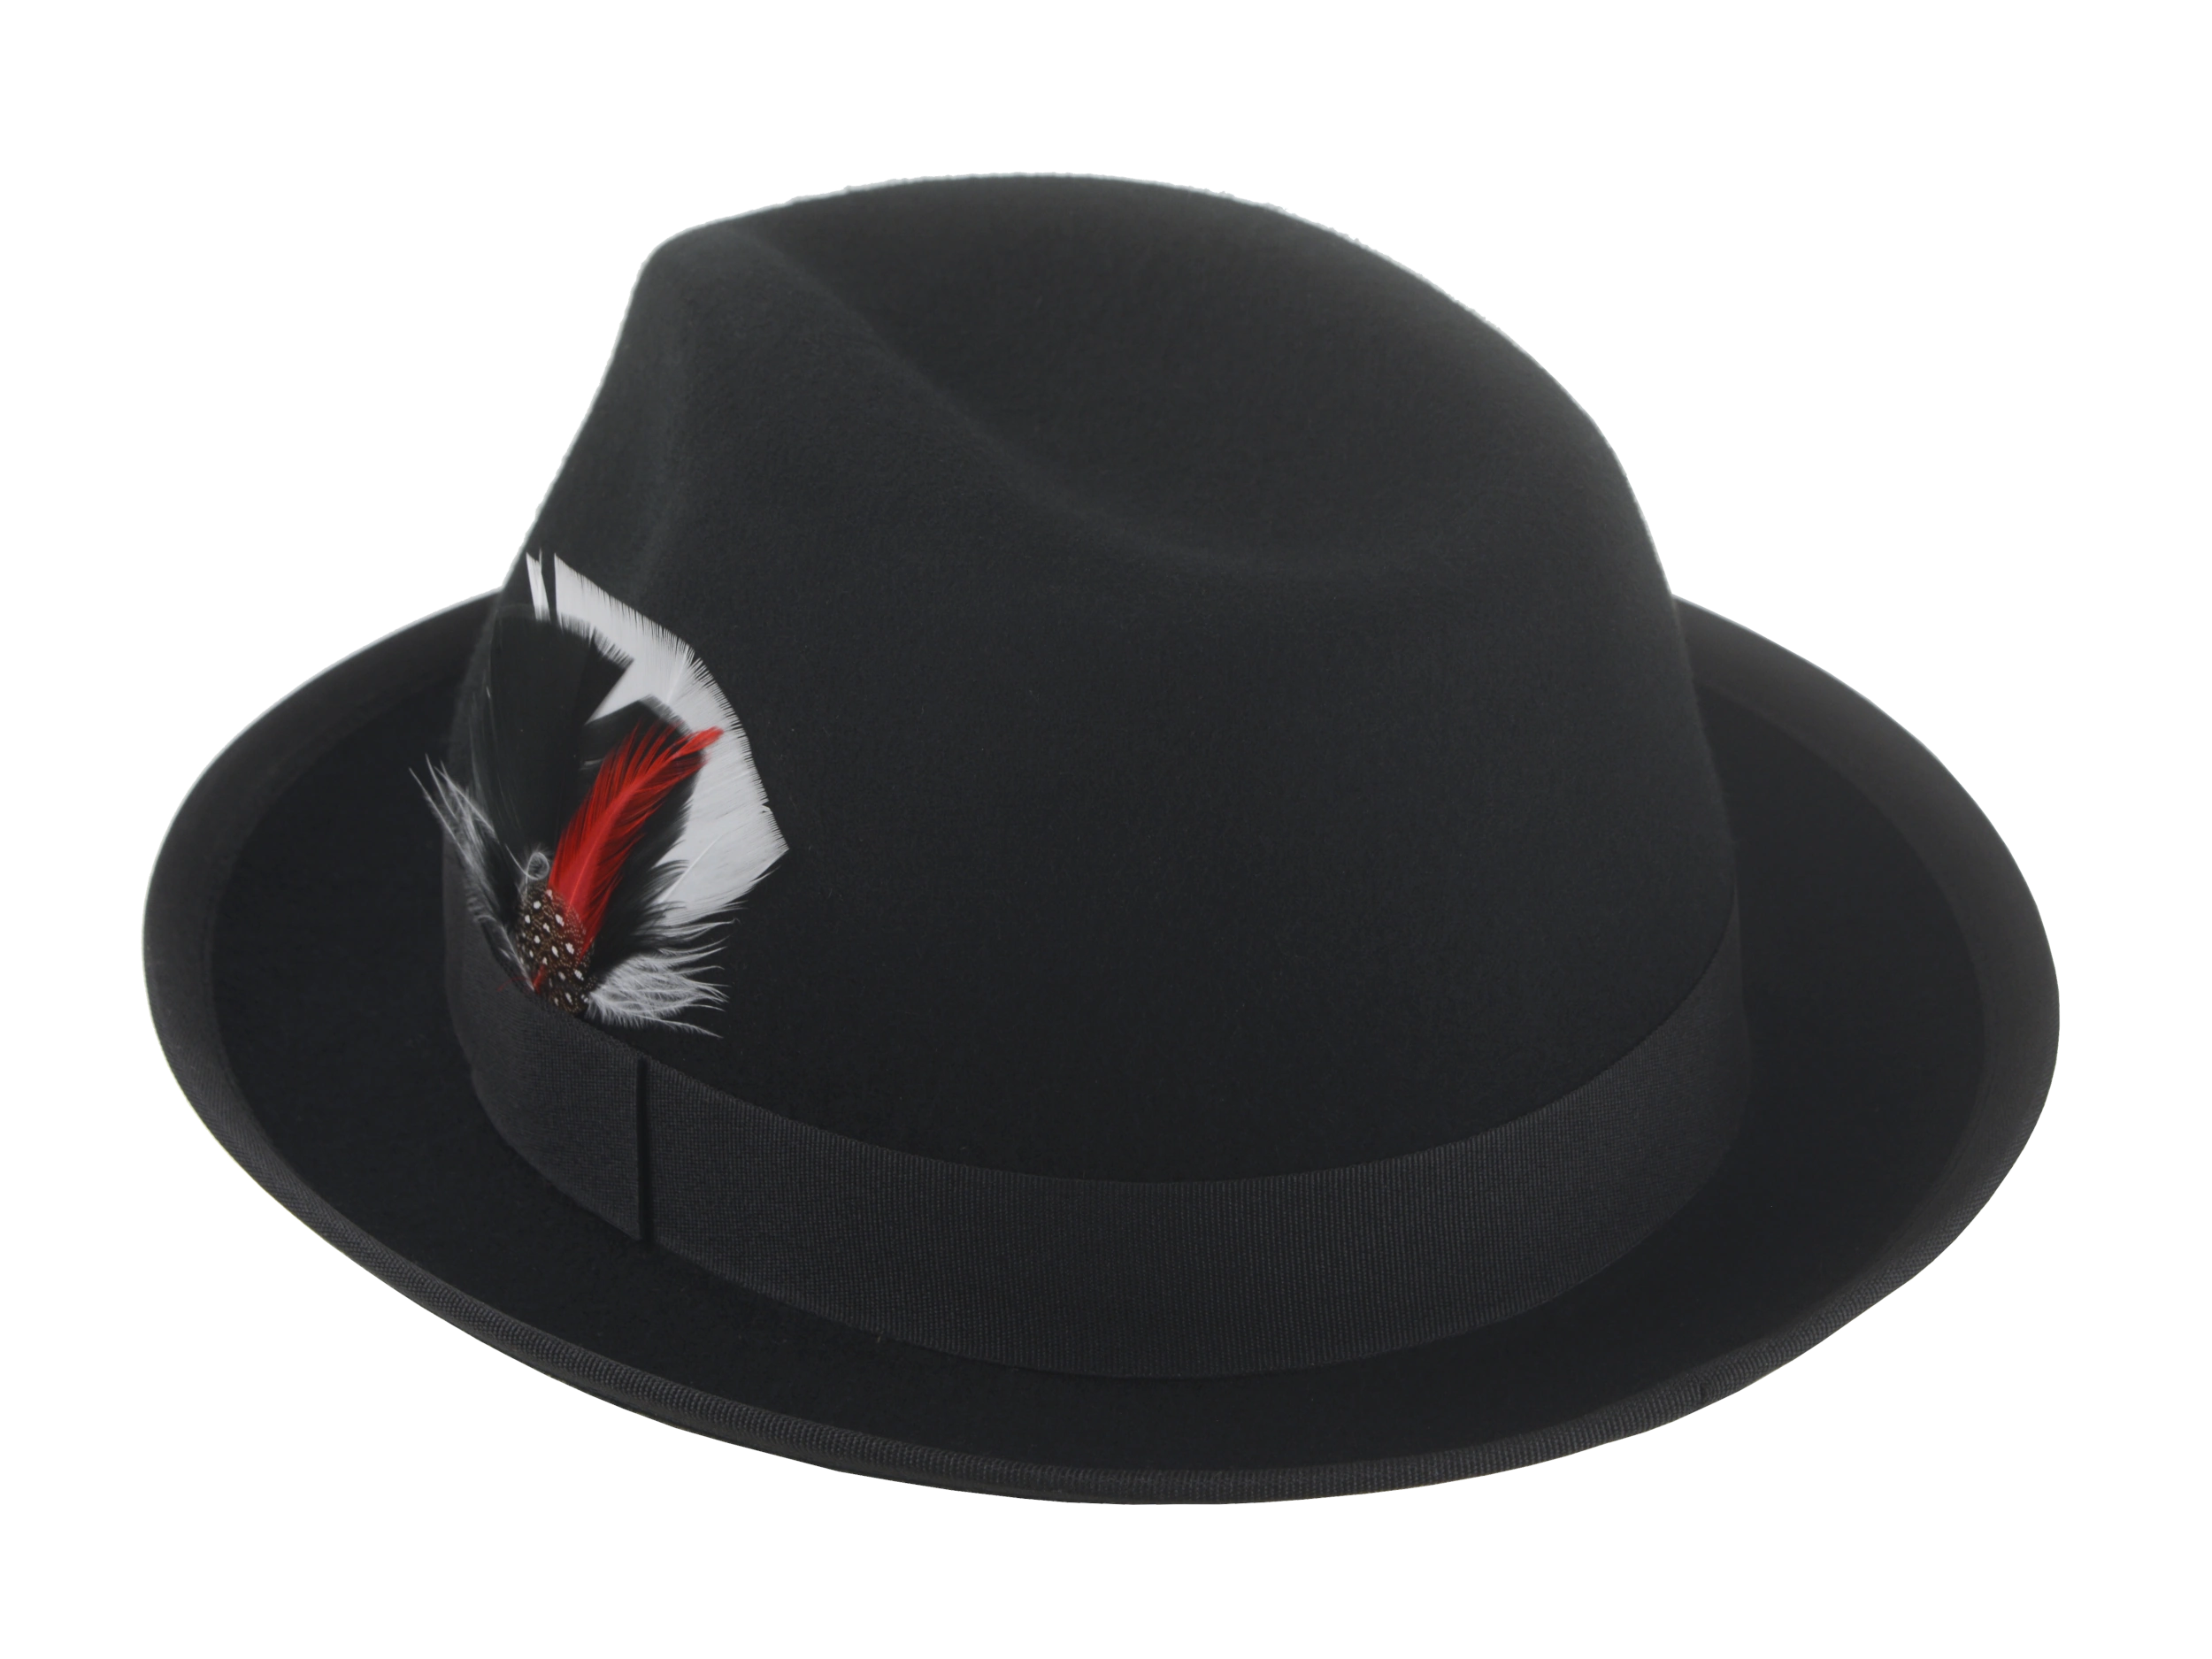 The Crab - Premium Wool Felt Trilby Fedora For Men or Women with Feather in Black White and Red Color | Agnoulita Quality Custom Hats 3